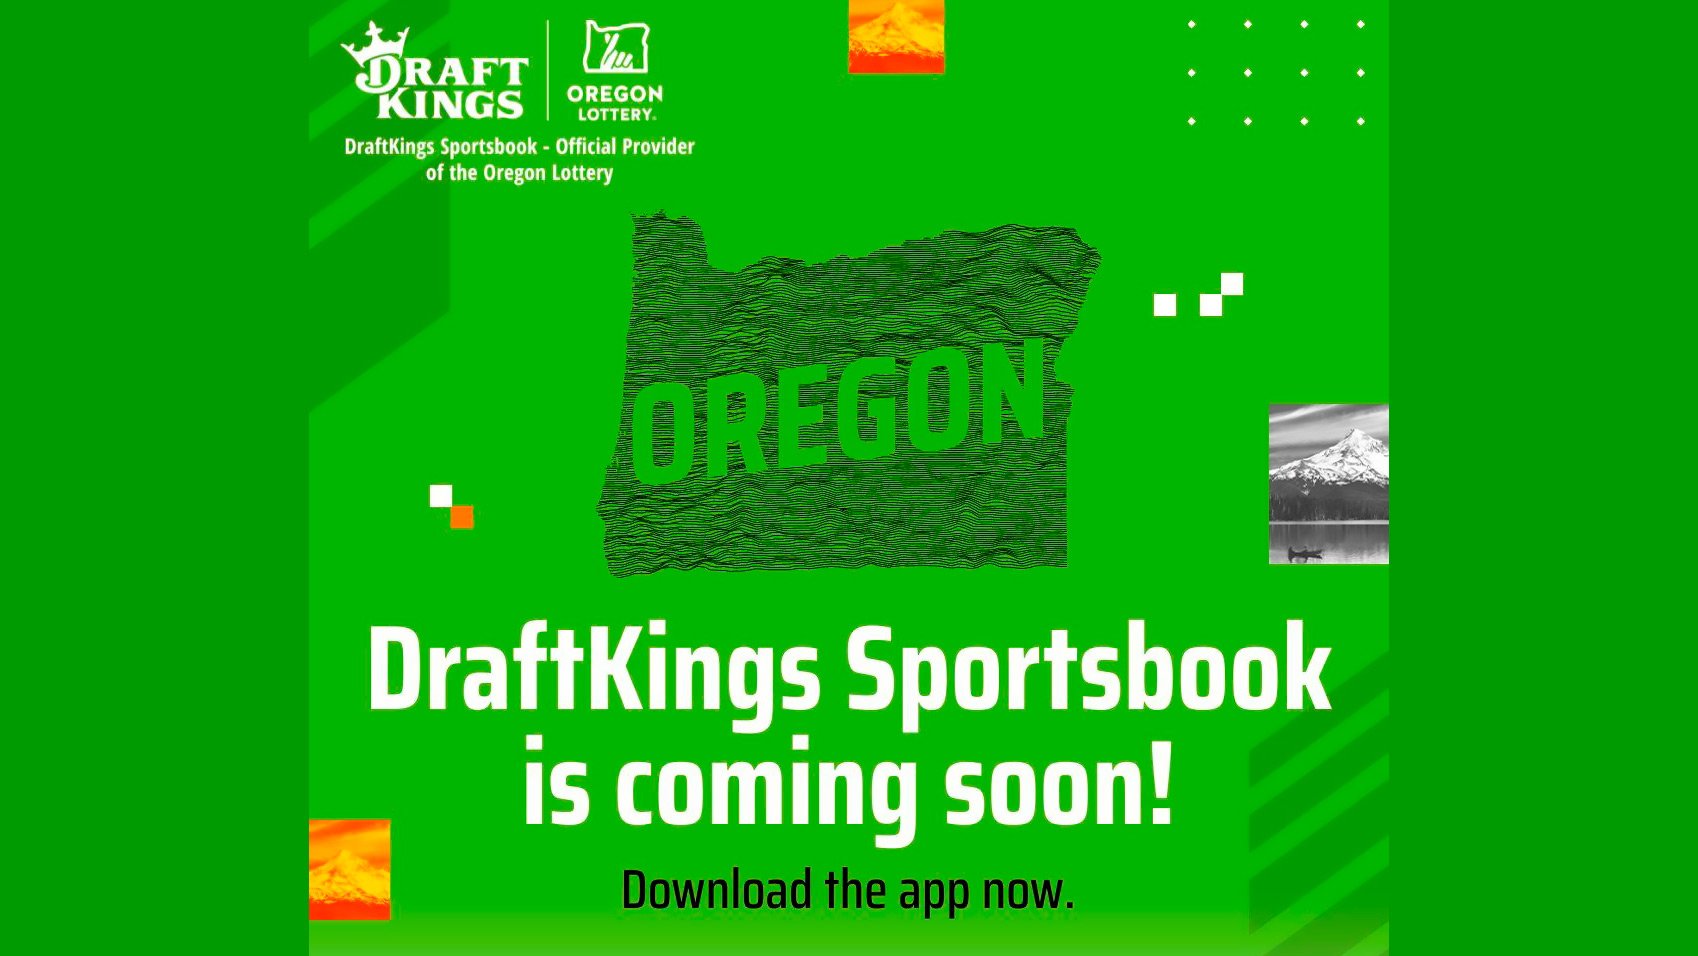 Download the Oregon Lottery App